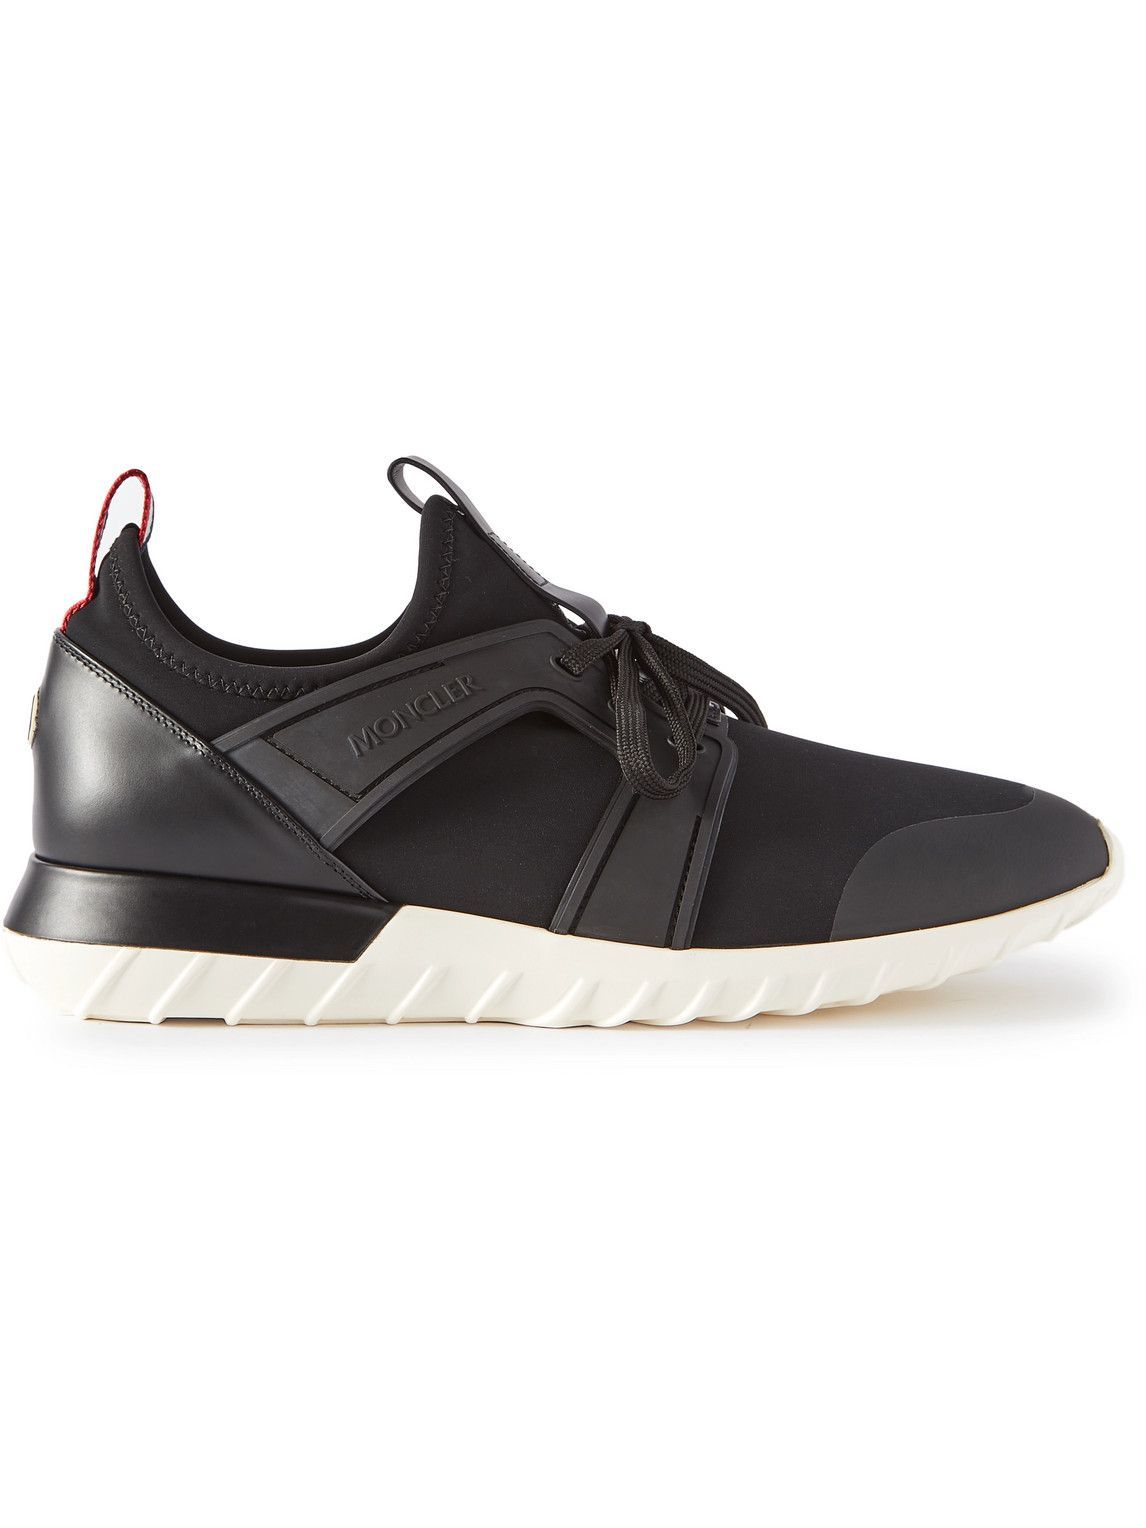 Moncler - Emilien Rubber and Leather-Trimmed Neoprene Sneakers - Black ...